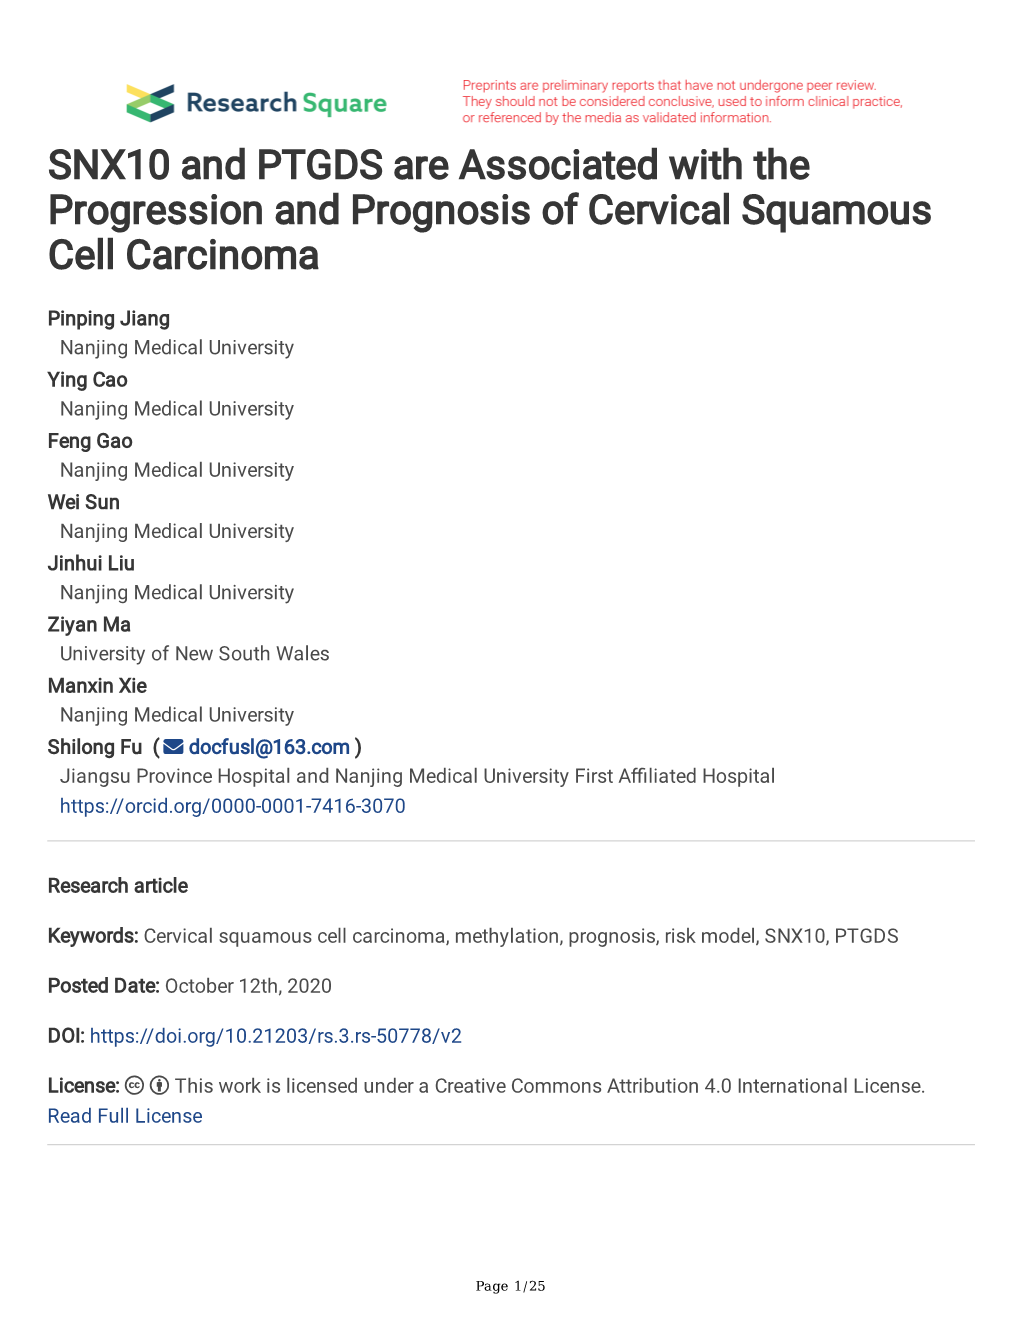 SNX10 and PTGDS Are Associated with the Progression and Prognosis of Cervical Squamous Cell Carcinoma